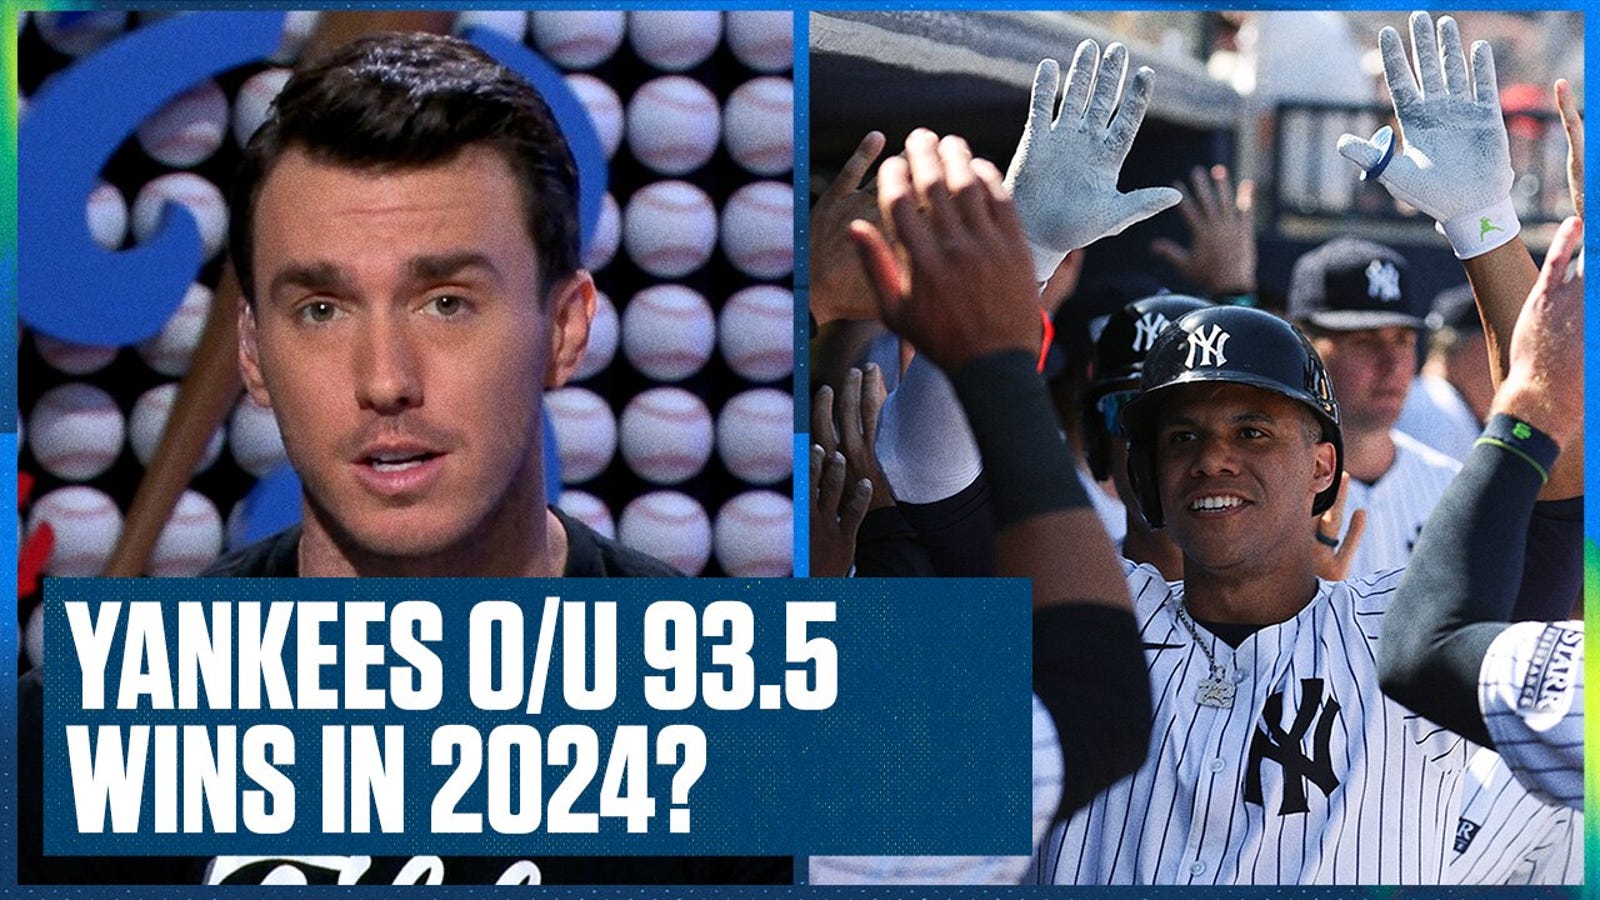 Will the New York Yankees win more than 93.5 games in 2024?